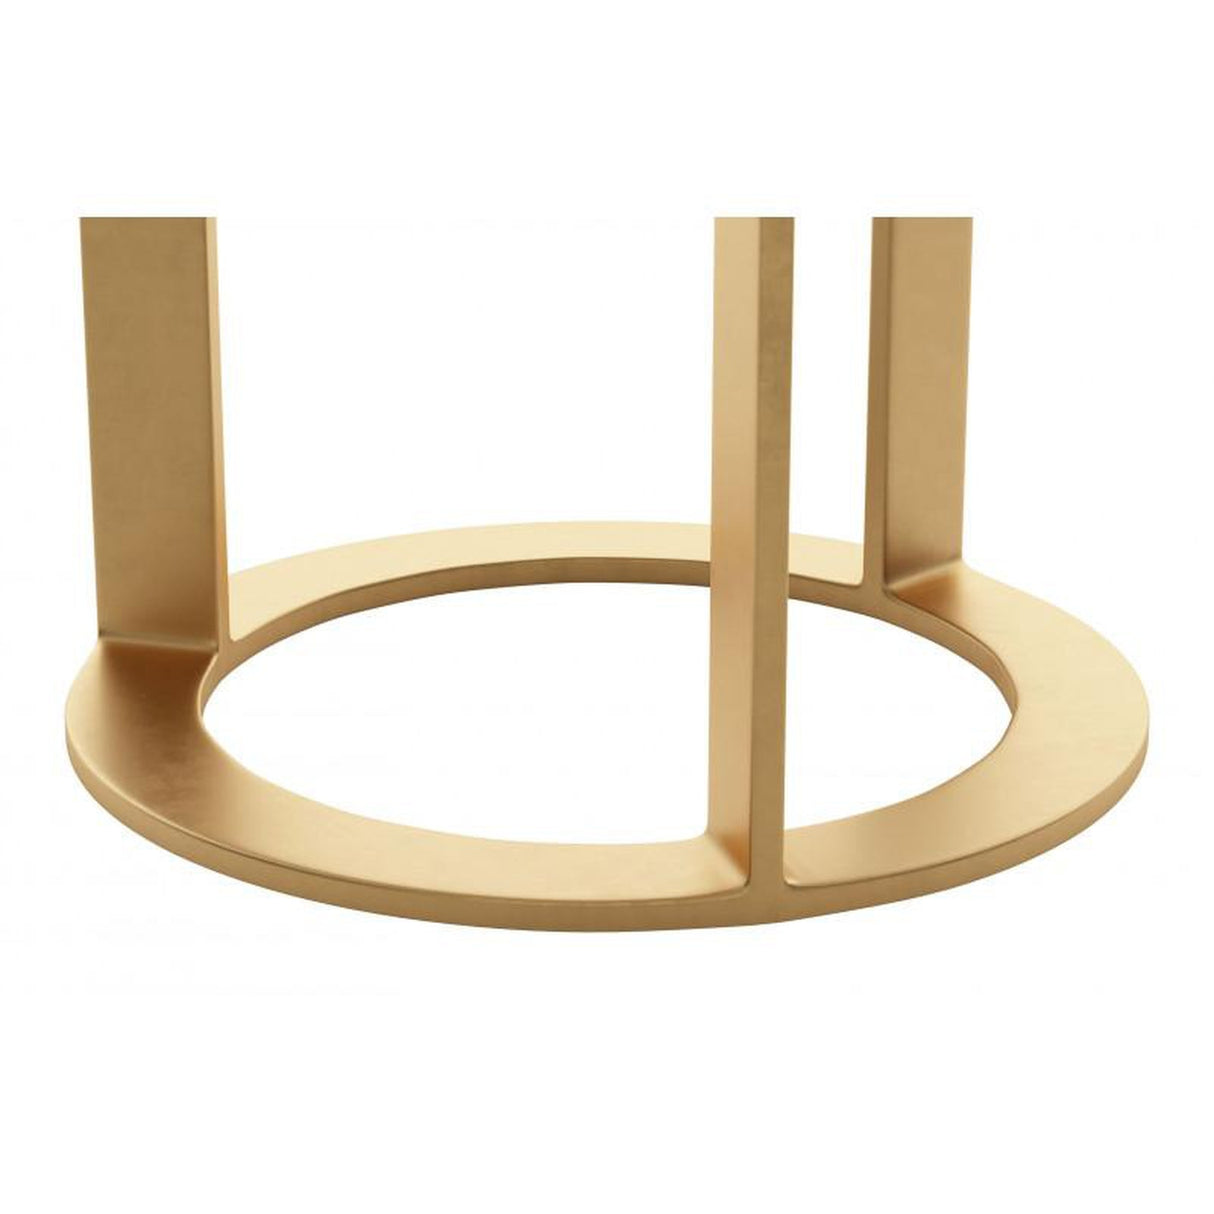 Zuo Helena Side Table White & Gold